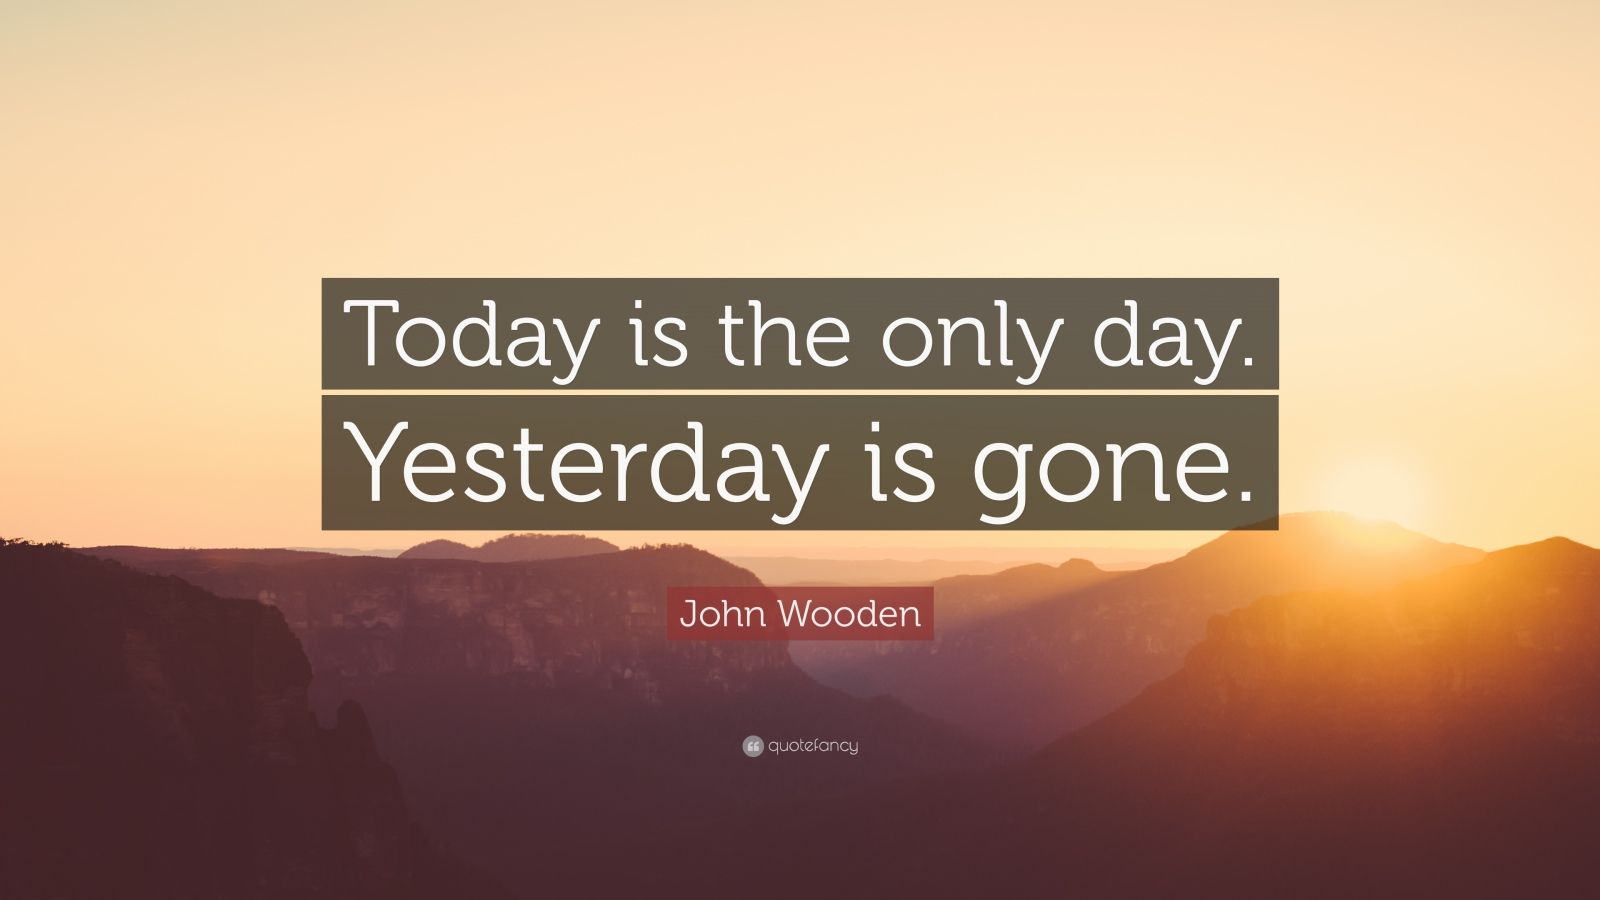 John Wooden Quote: “Today is the only day. Yesterday is gone.” (12